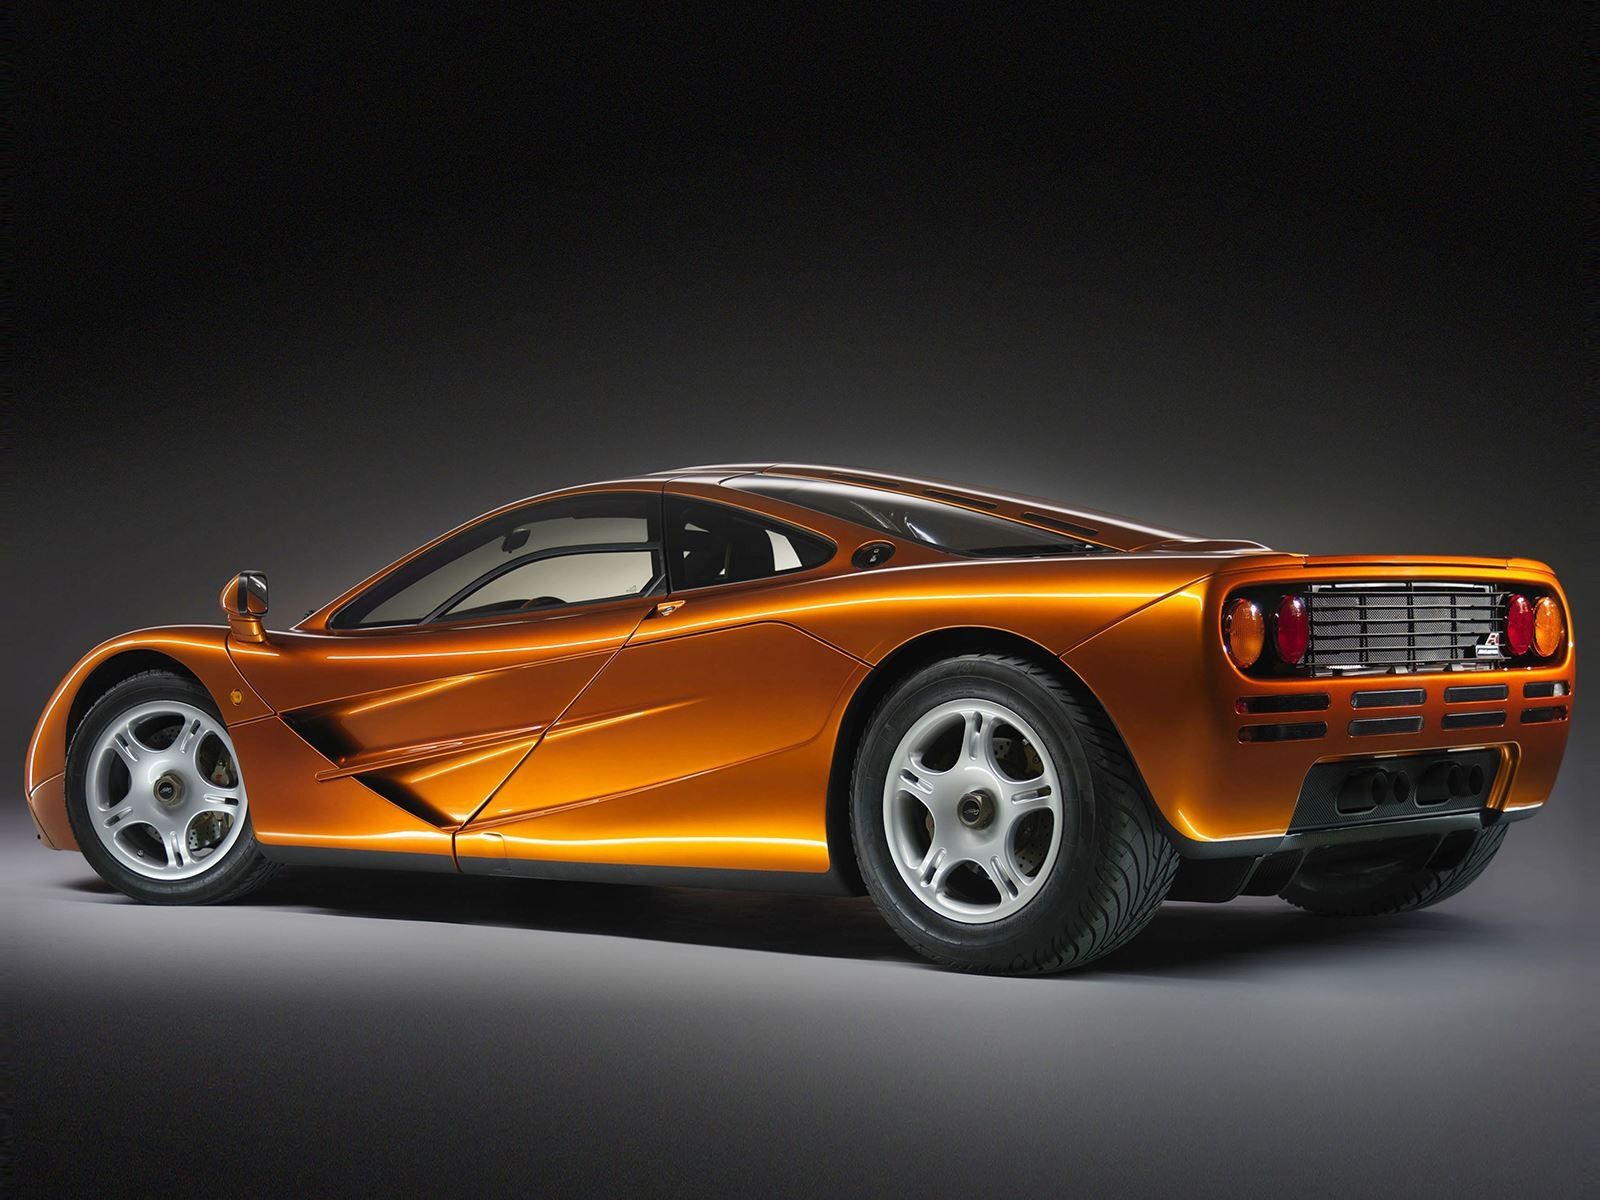 A 'Superbly Maintained' McLaren F1 Just Went Up for Sale